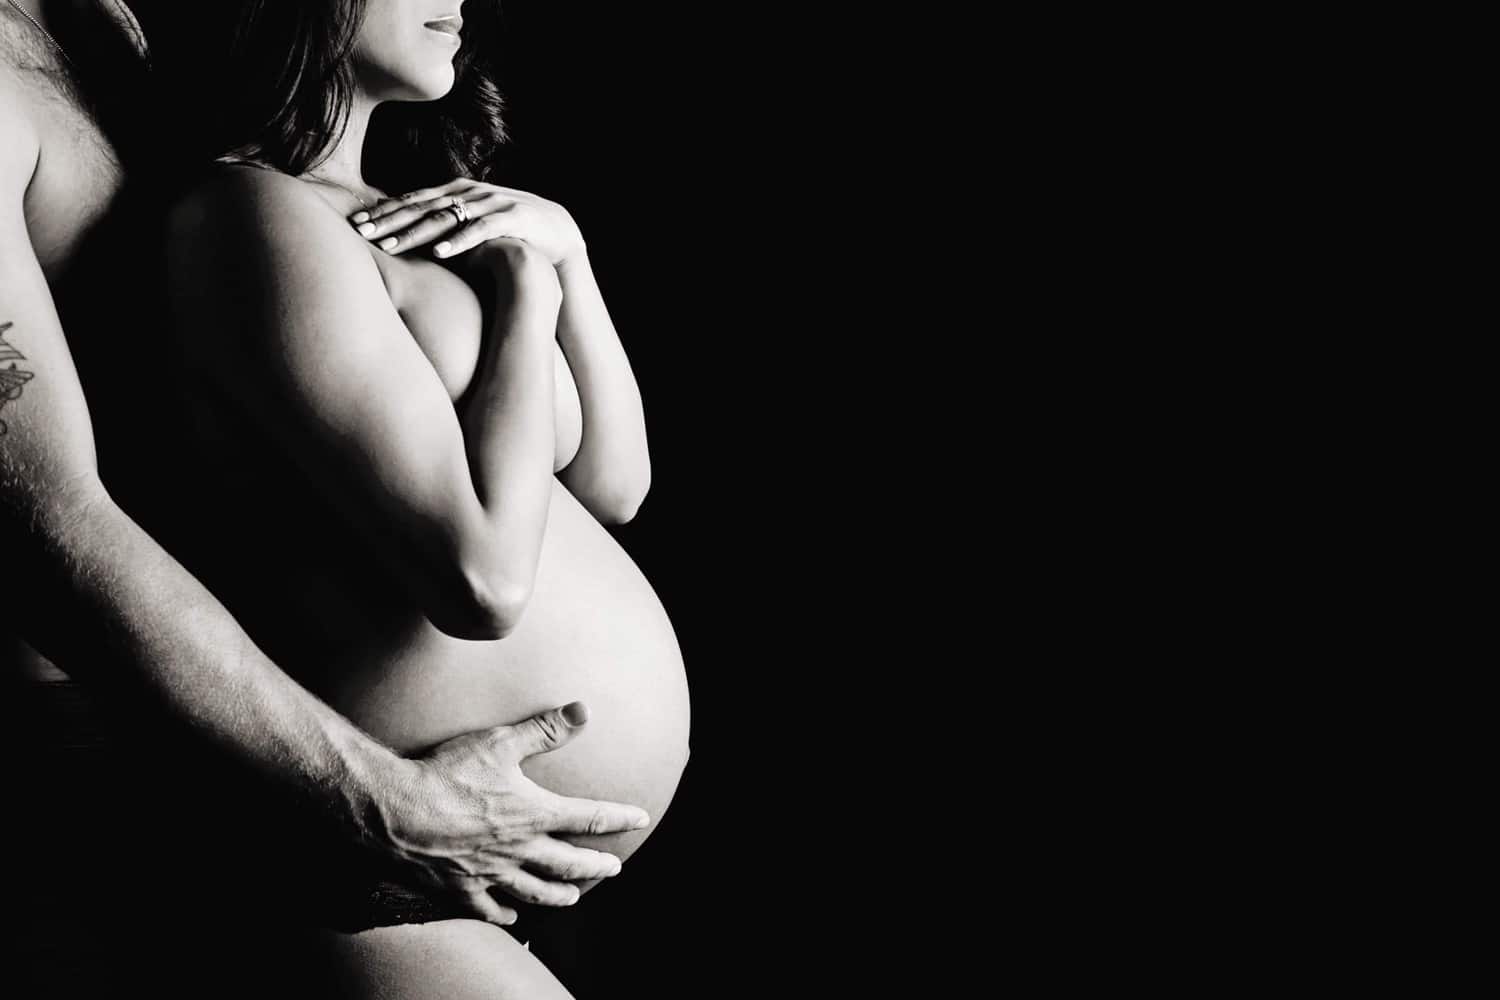 A man and a woman in a black and white maternity photo.